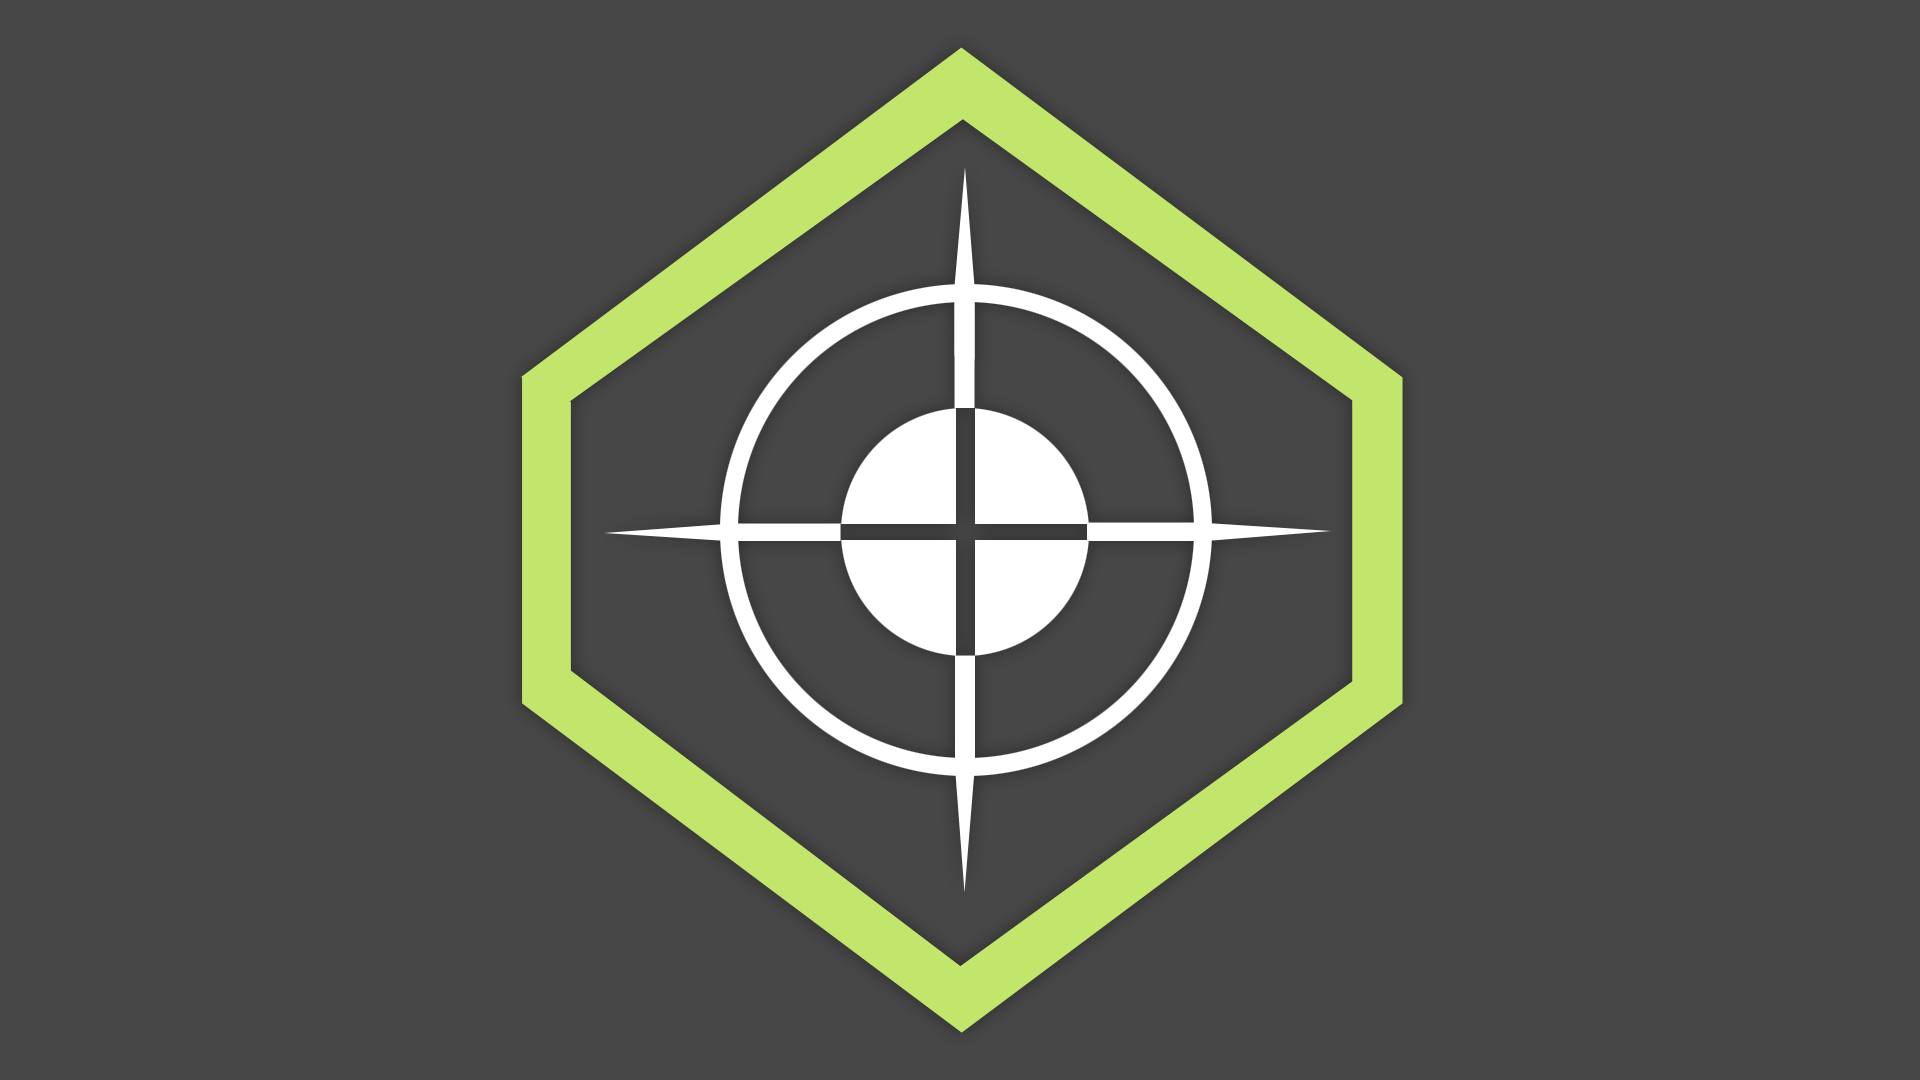 Icon for Skilled Marksman